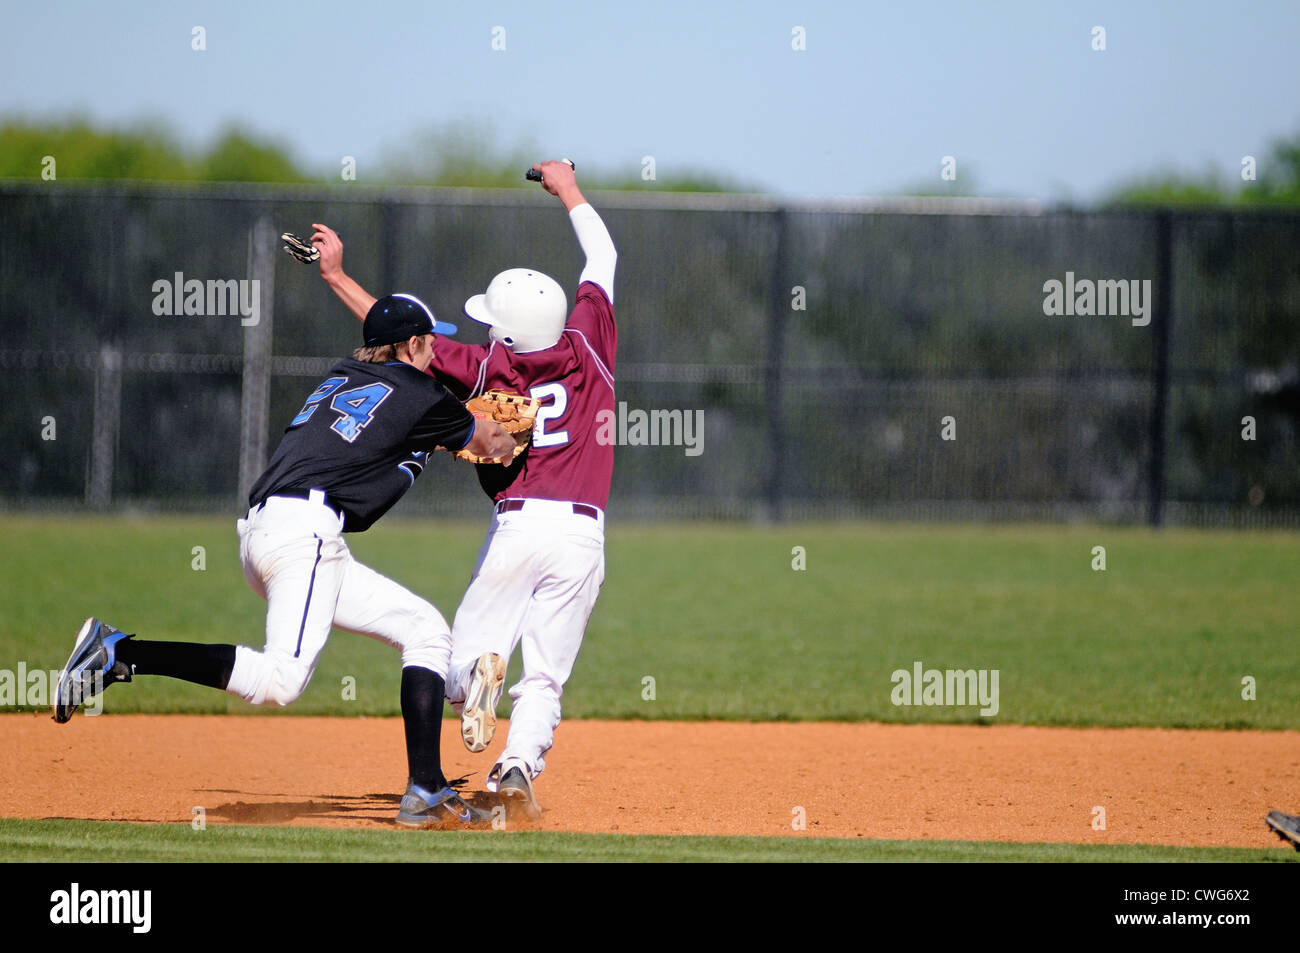 First baseman tags a base runner during a rundown play between first and second base. USA. Stock Photo